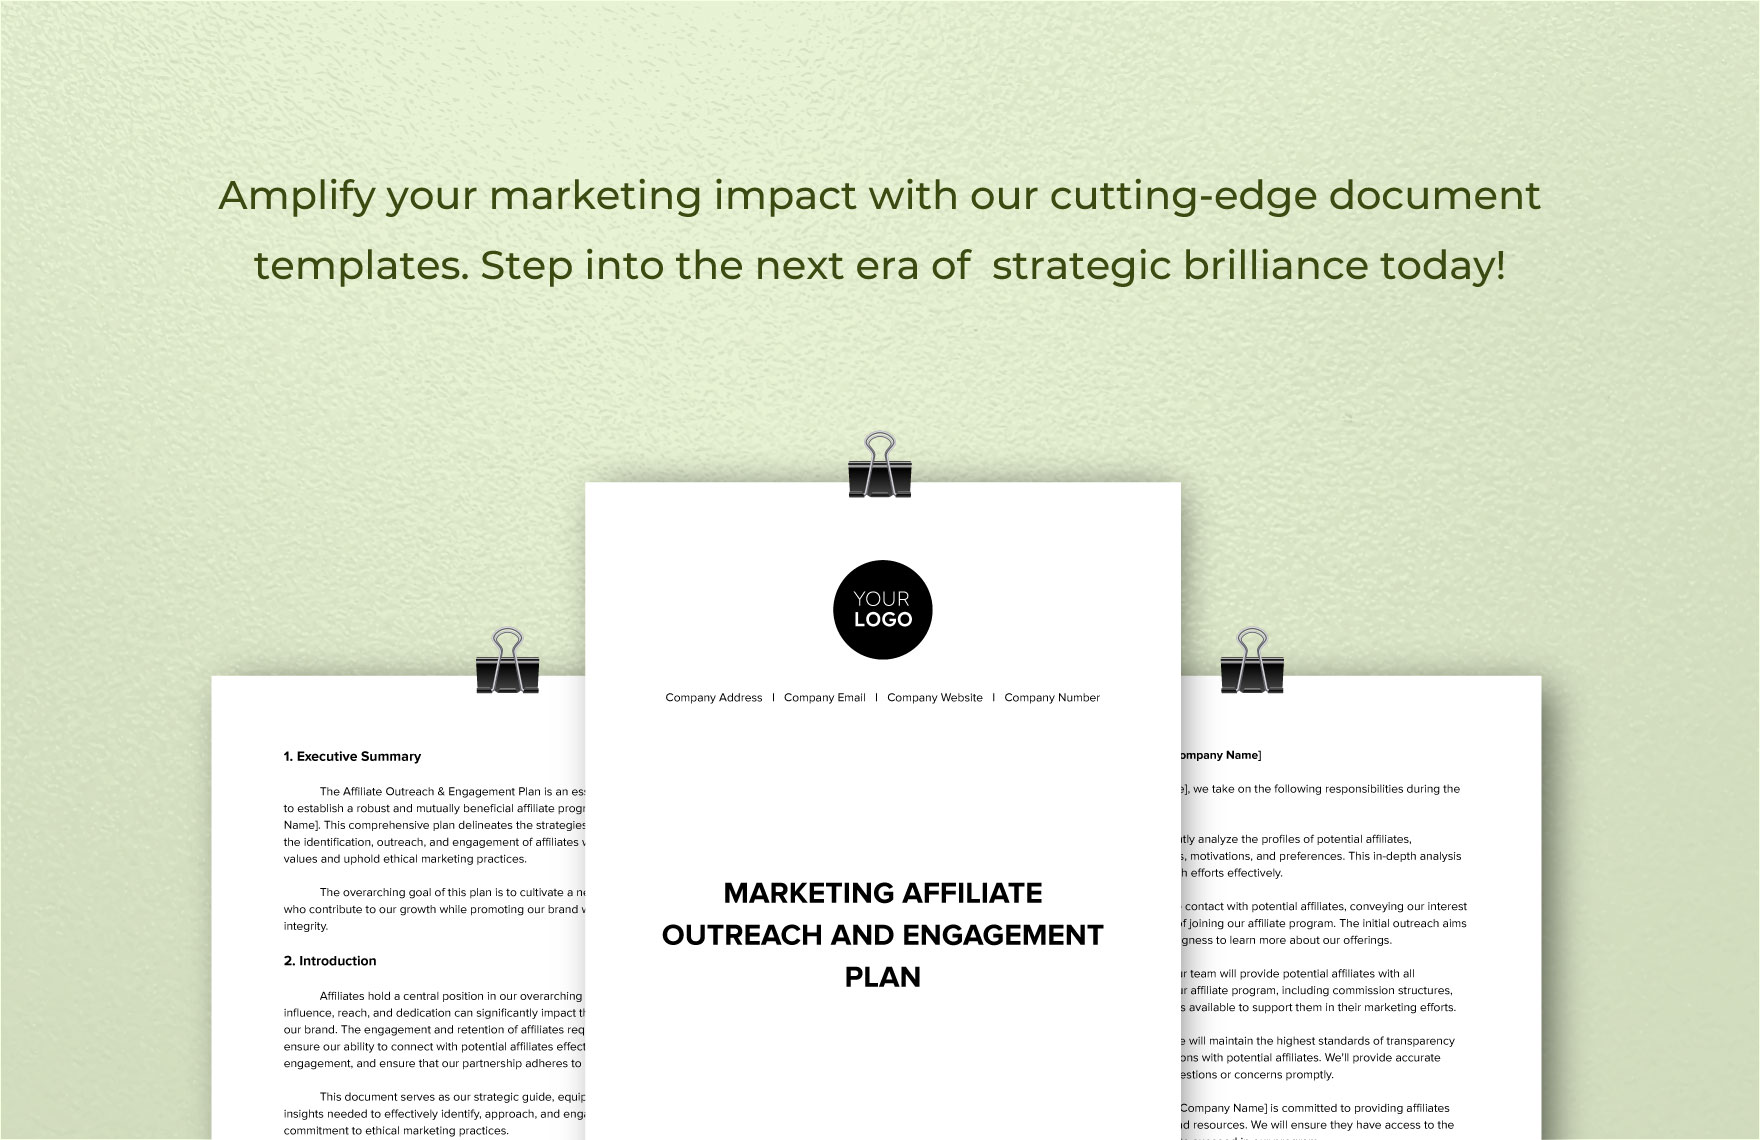 Marketing Affiliate Outreach & Engagement Plan Template